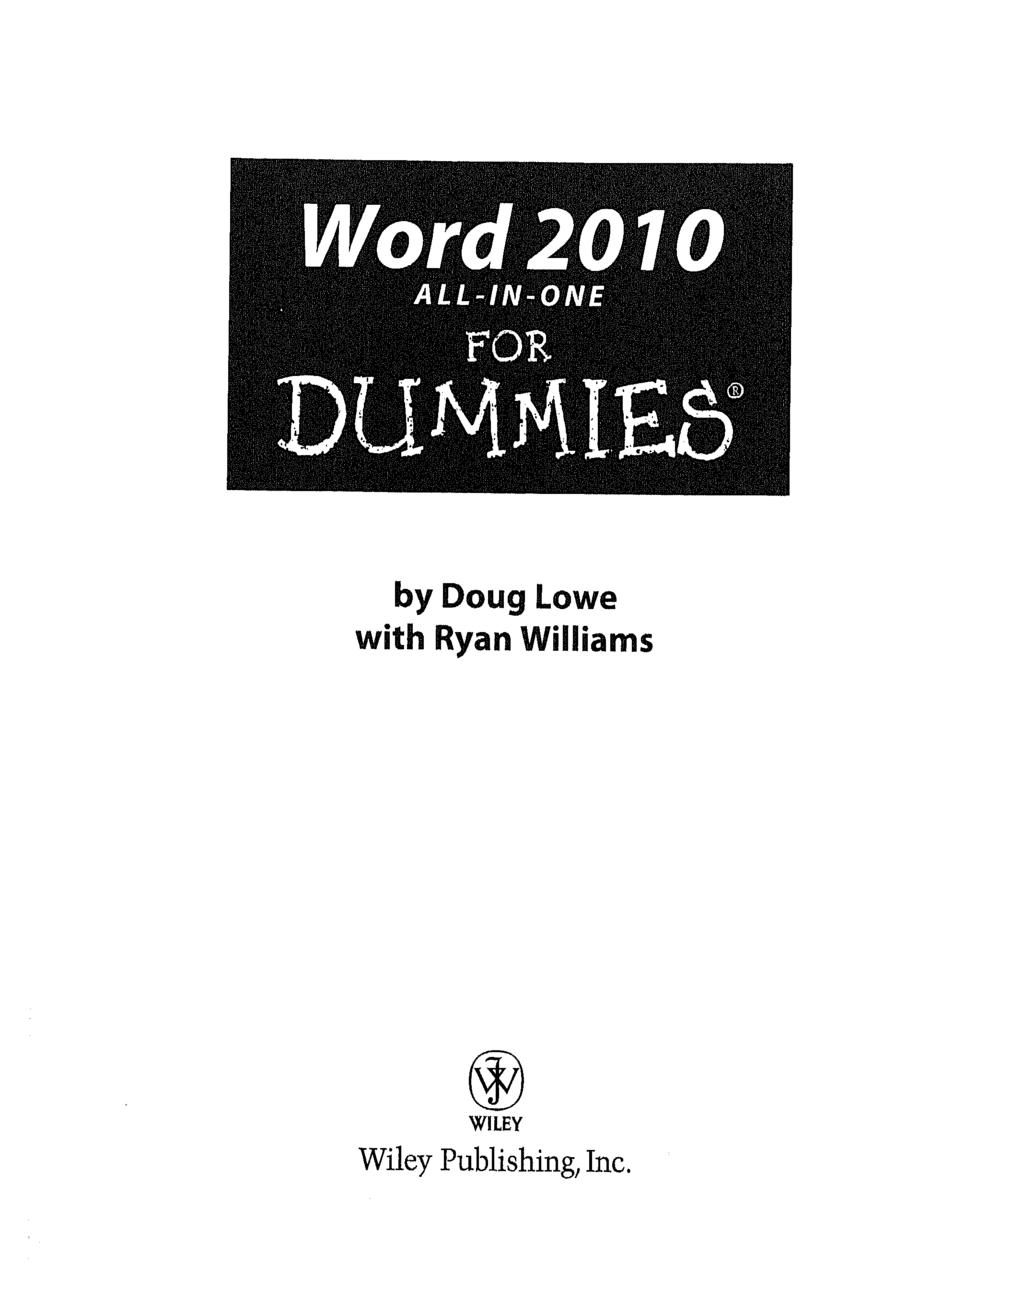 Word 2010 ALL-IN-ONE FOR by Doug Lowe with